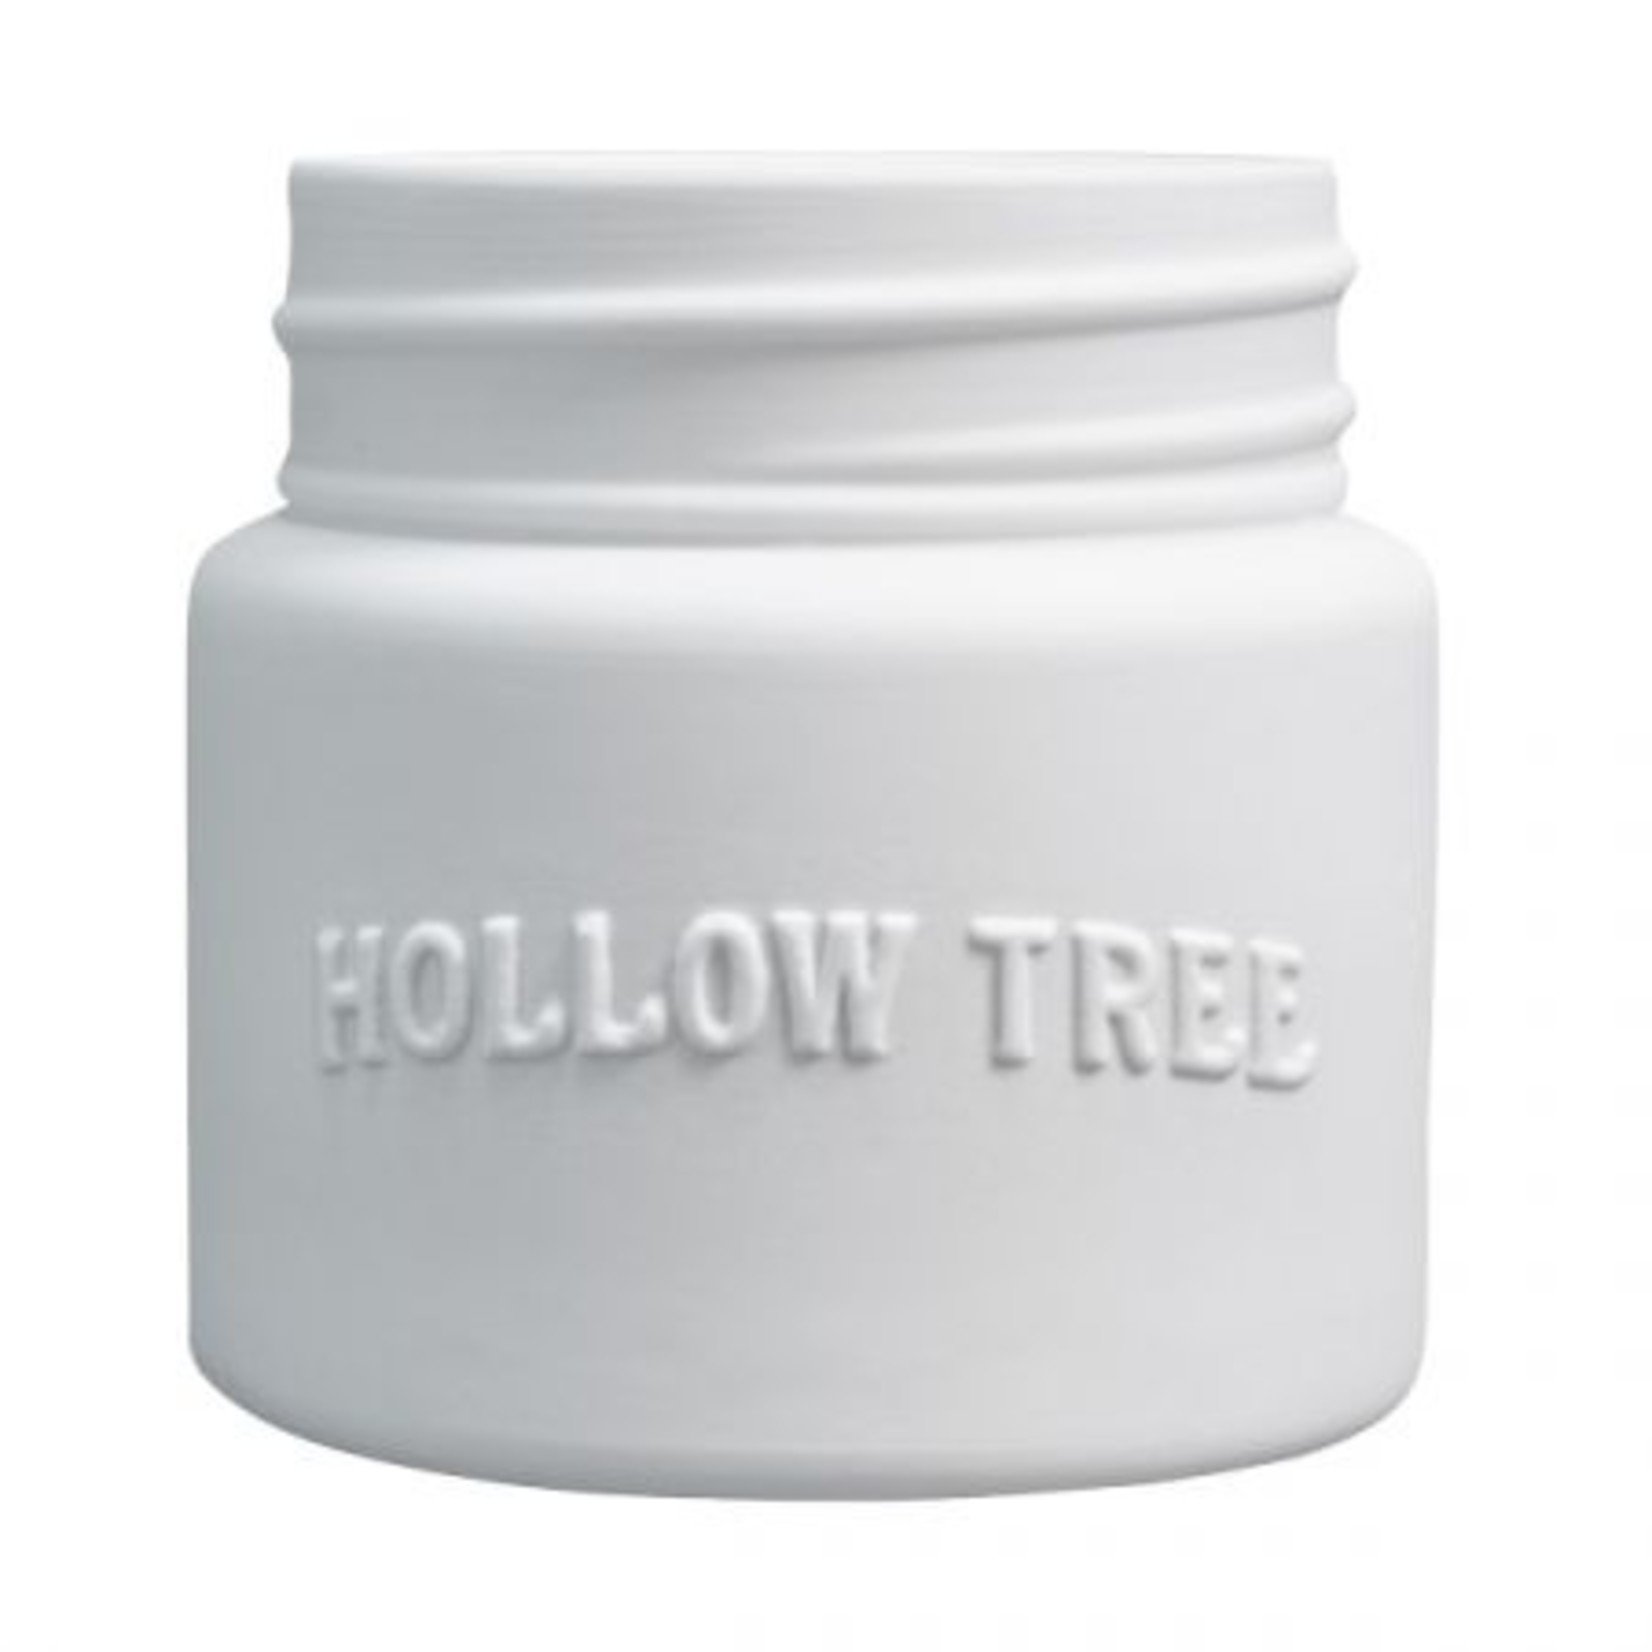 Hollow Tree Fireweed Candle